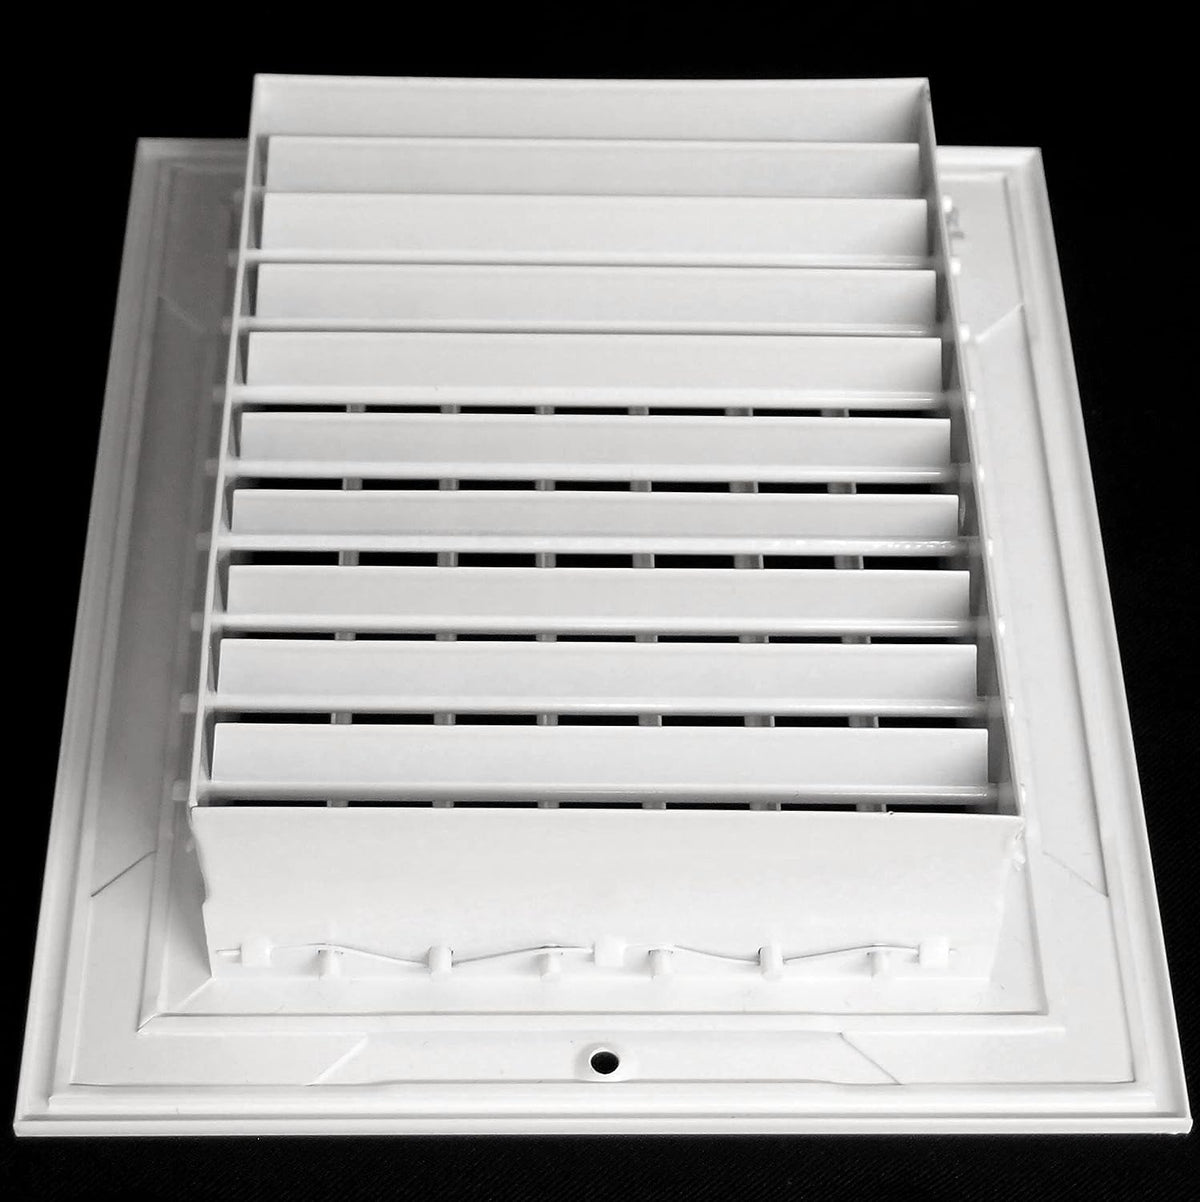 8&quot;w X 4&quot;h Aluminum Double Deflection Adjustable Air Supply HVAC Diffuser - Full Control Vertical/Horizontal Airflow Direction